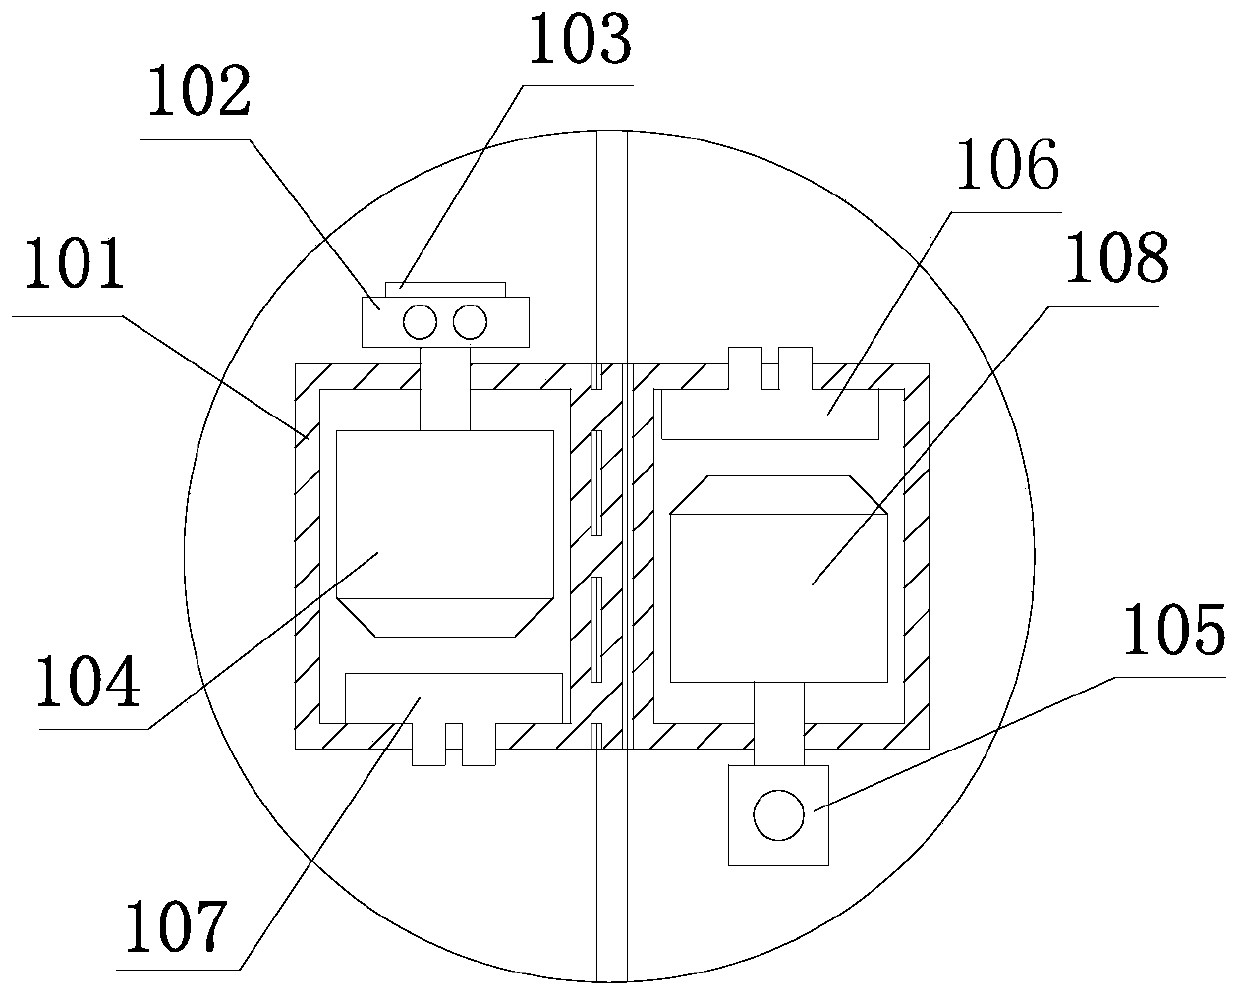 Building engineering shaft measuring device and engineering shaft model construction method